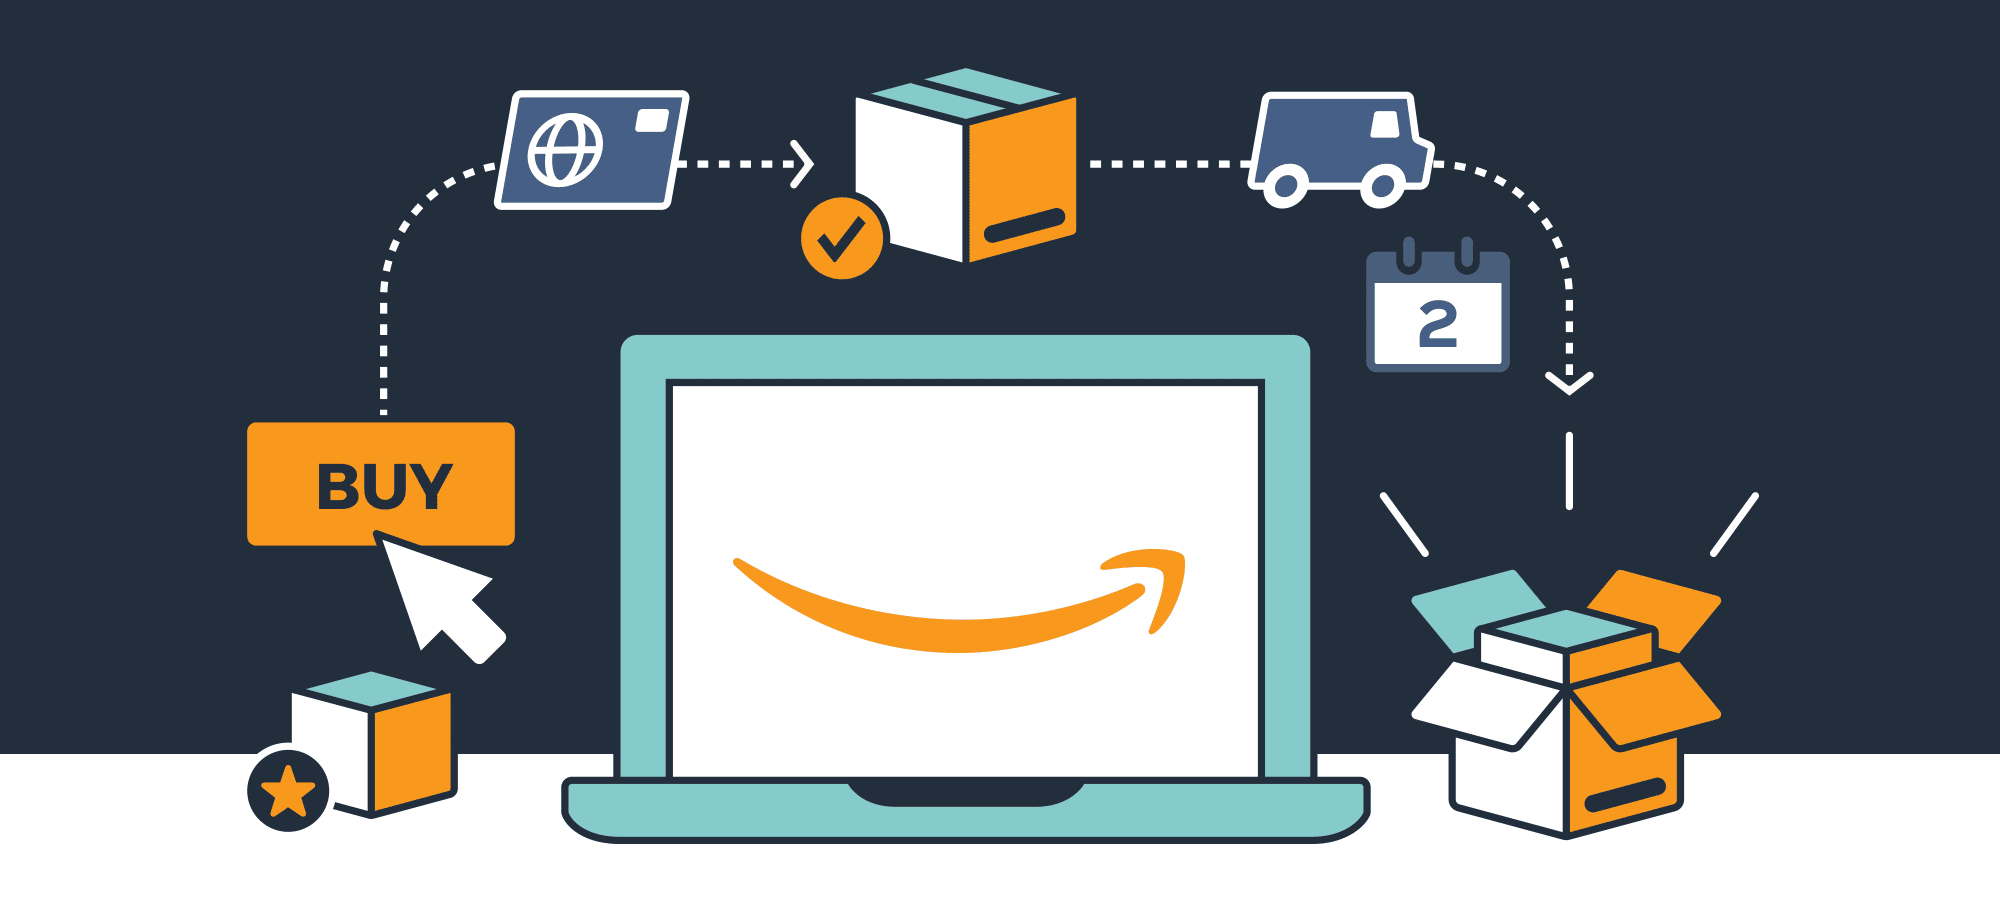 How to Search for Products Sold and Shipped By Amazon Itself